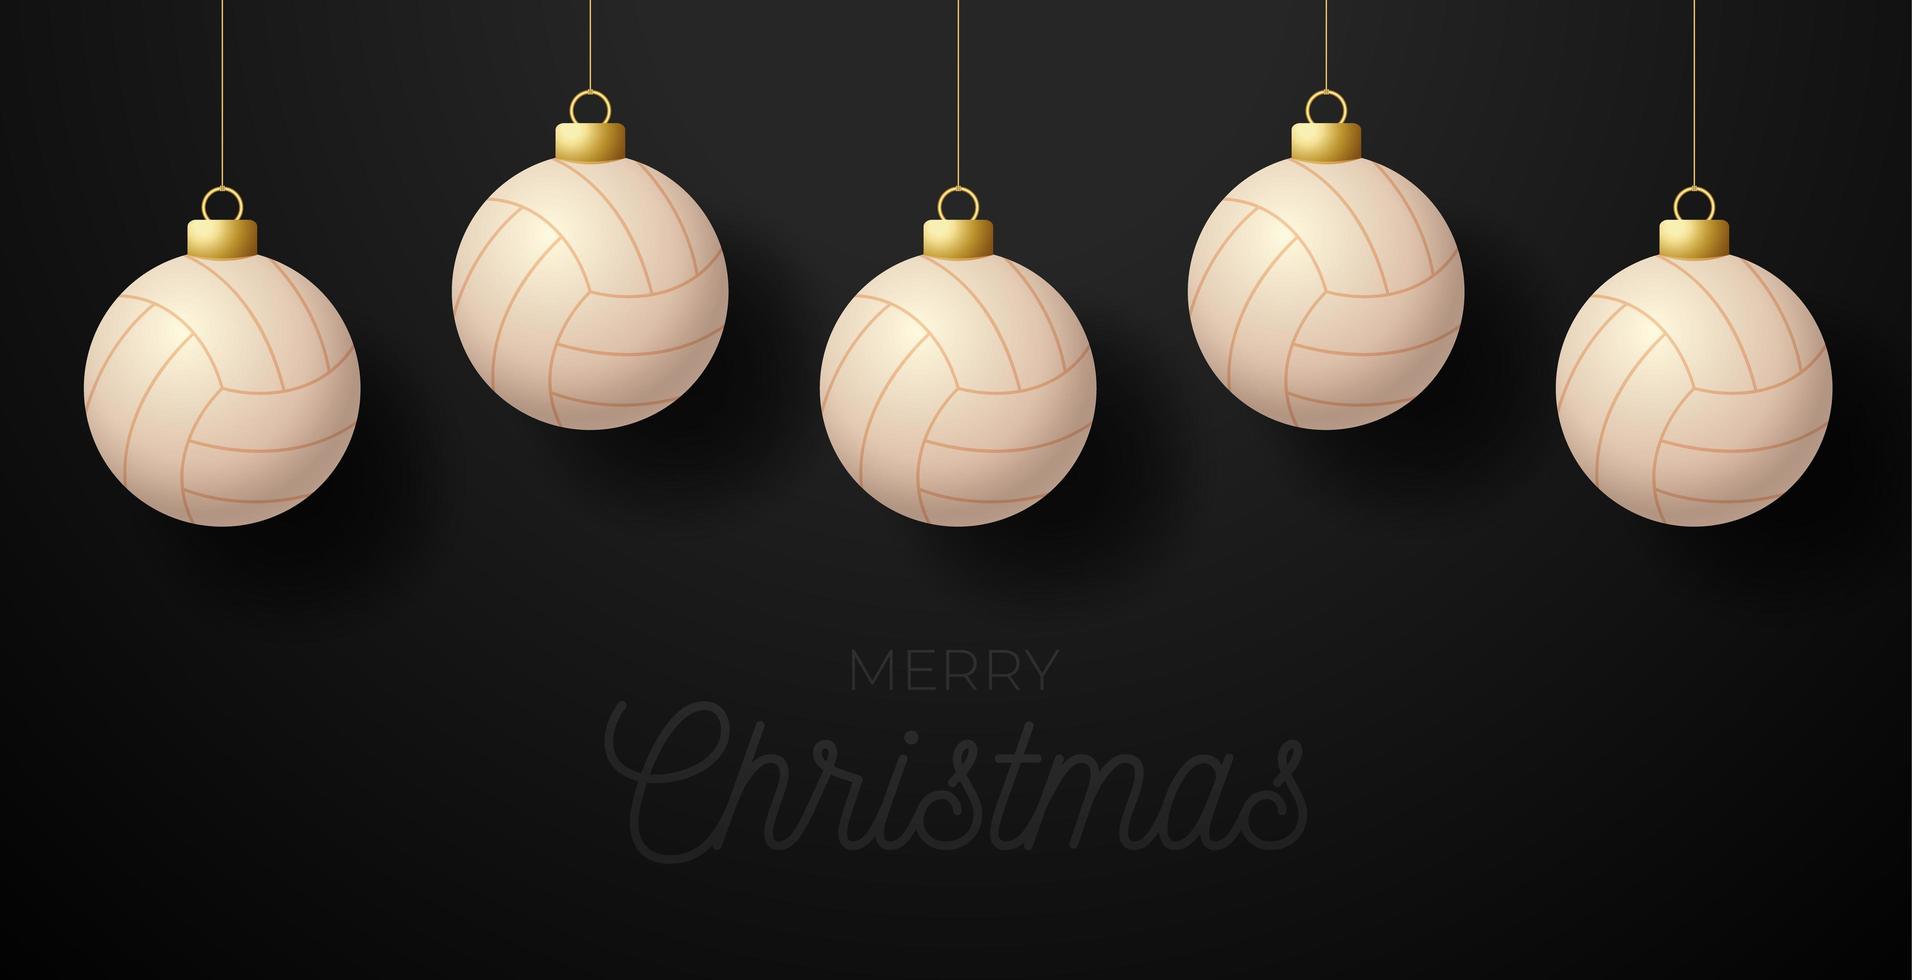 Merry Christmas volleyball greeting card. Hang on a thread volleyball ball as a Christmas ball on black horizontal background. Sport Vector illustration.